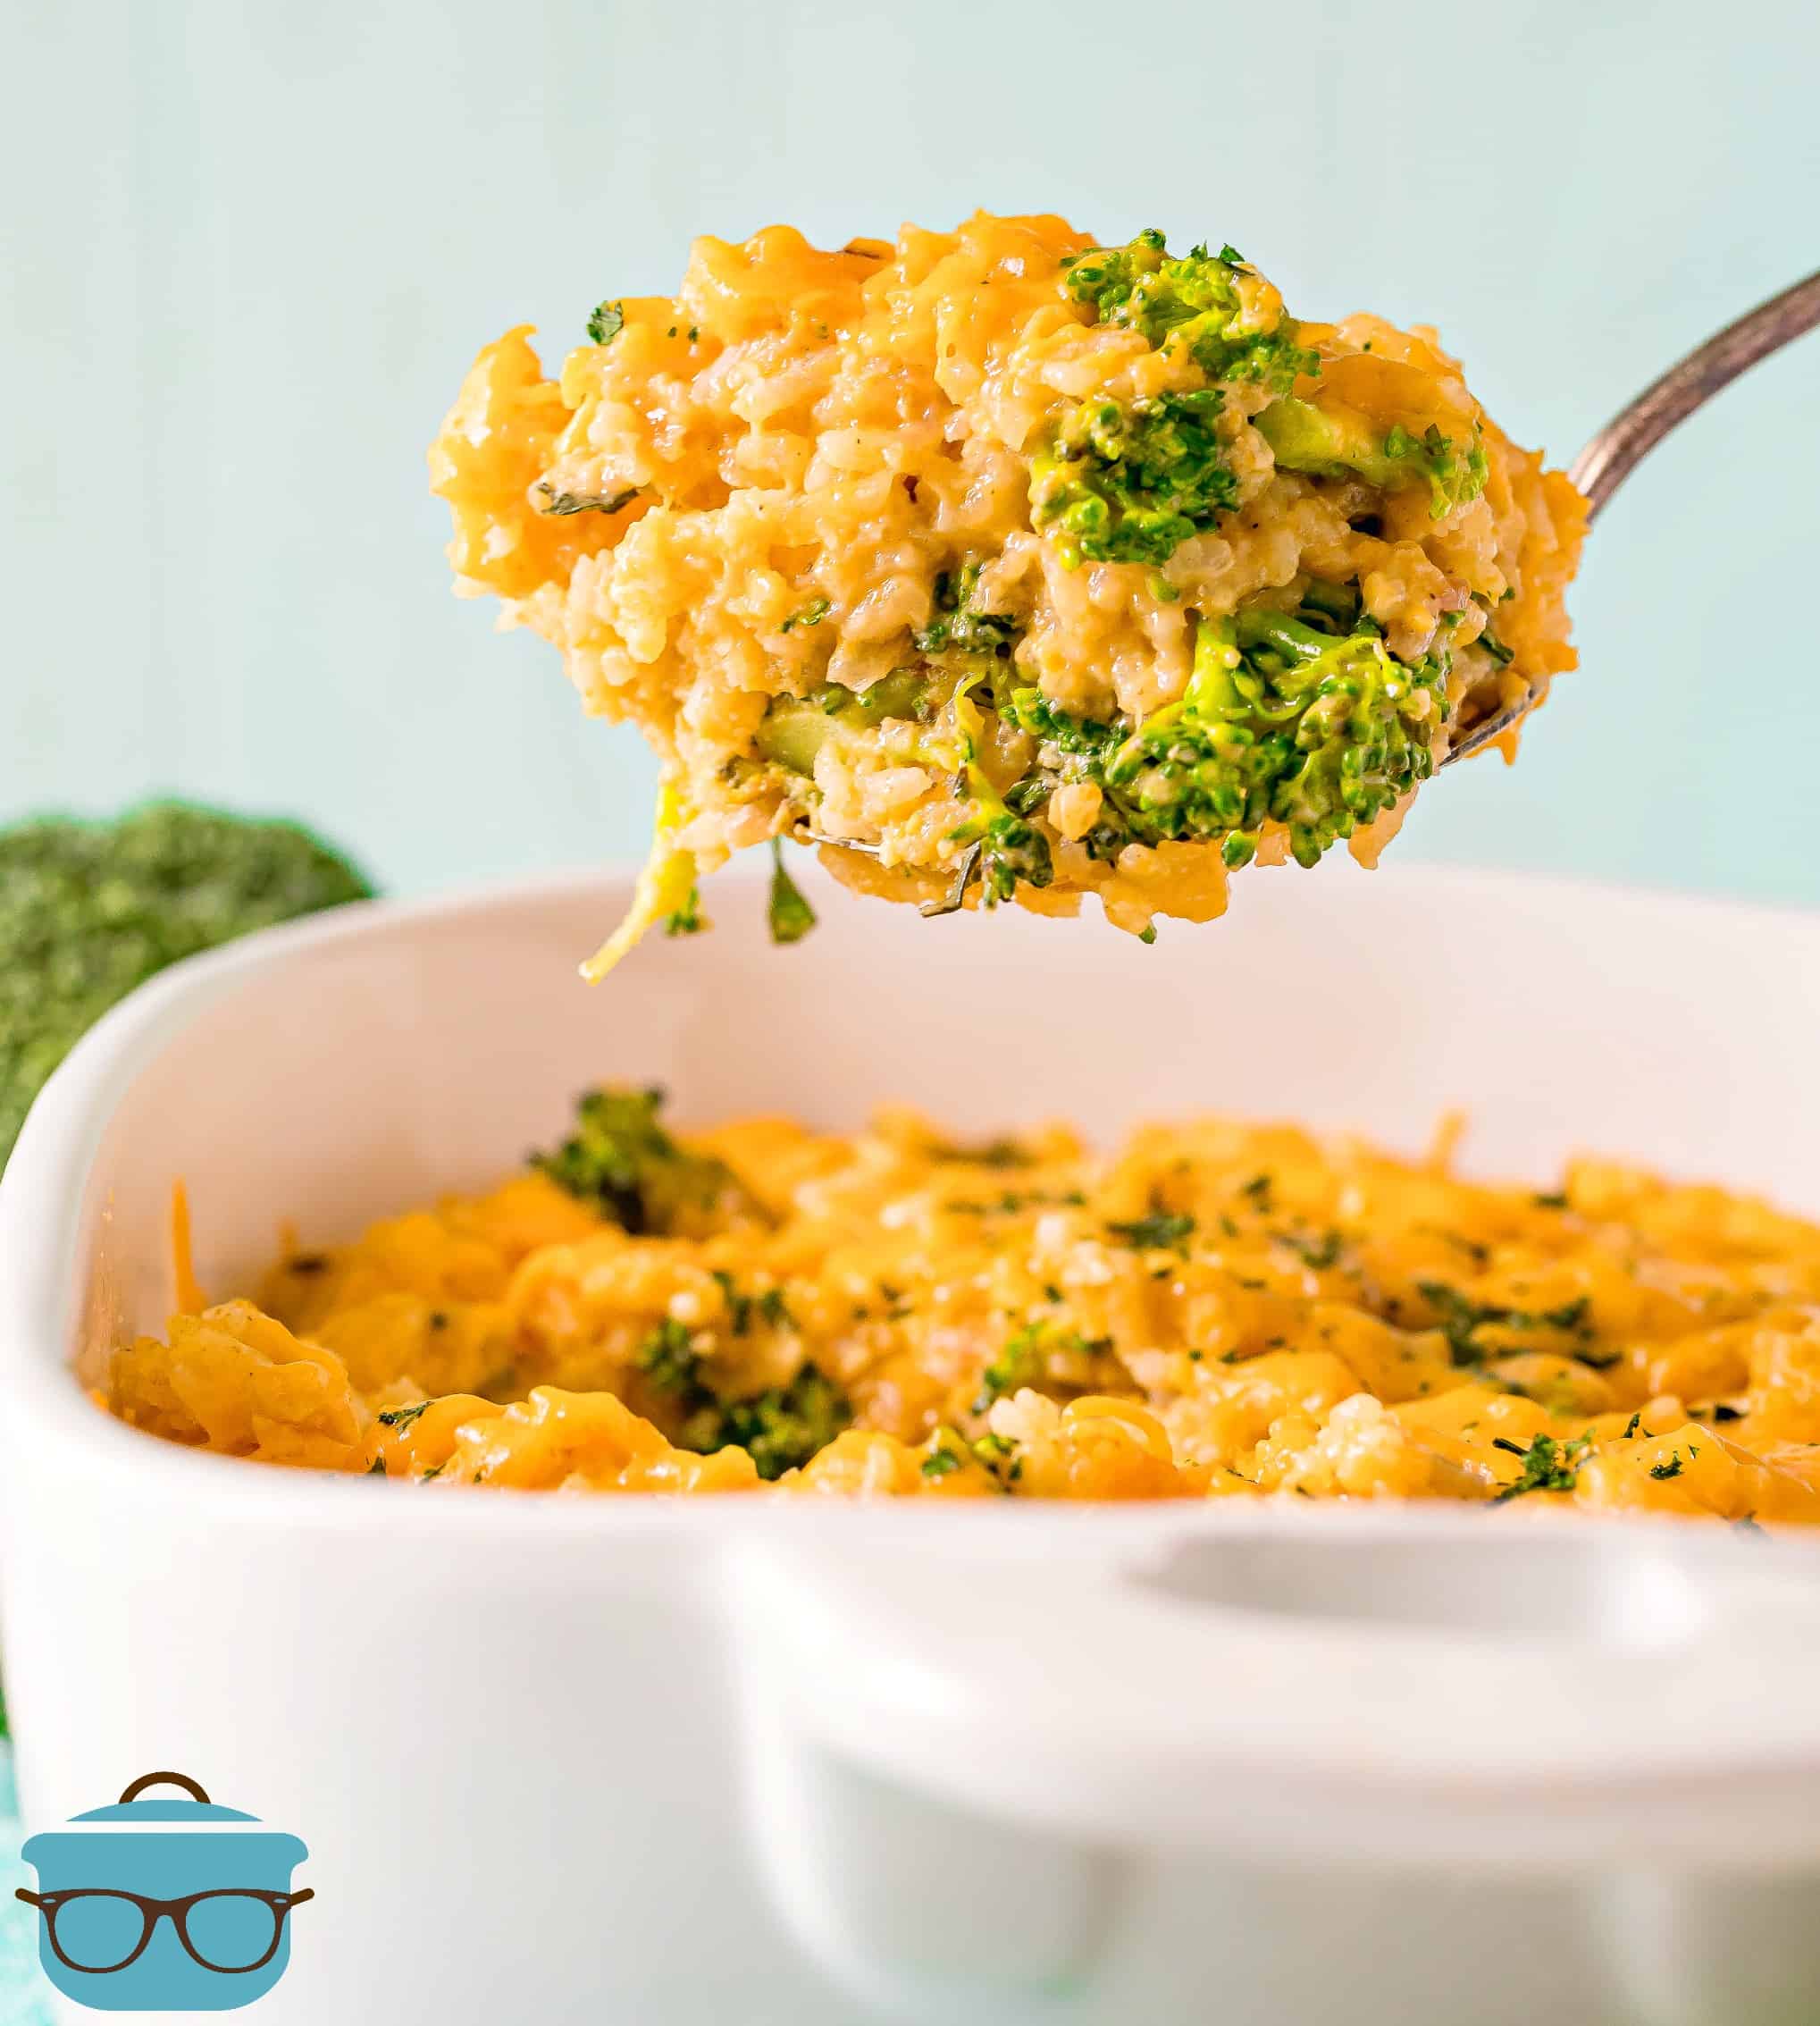 large spoonful of broccoli rice cheddar casserole being held up over casserole dish.